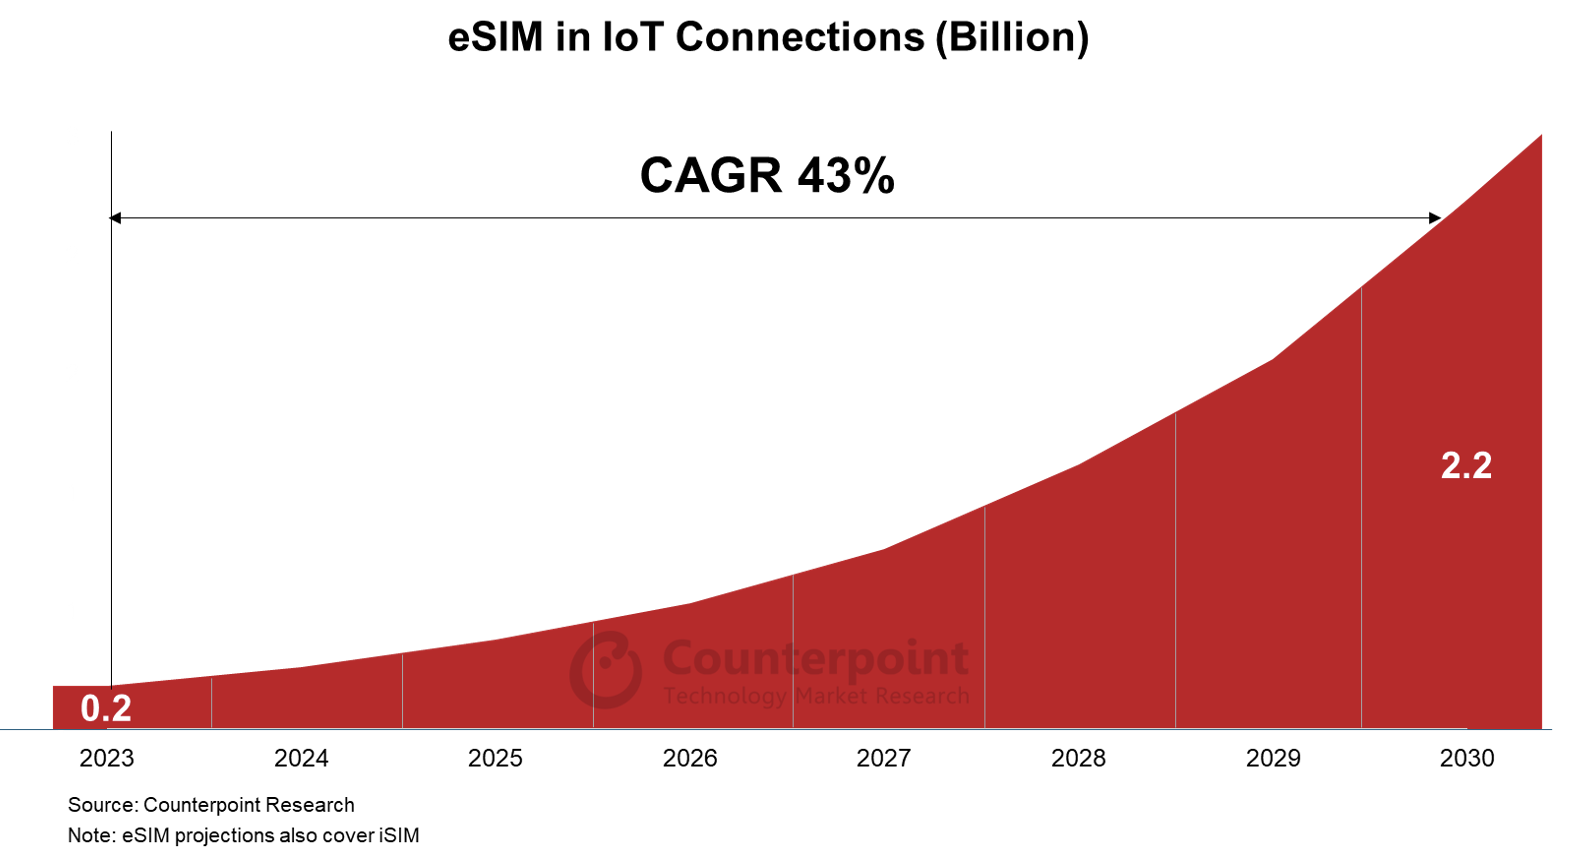 2.2 Billion IoT Connections Expected to be on eSIM by 2030